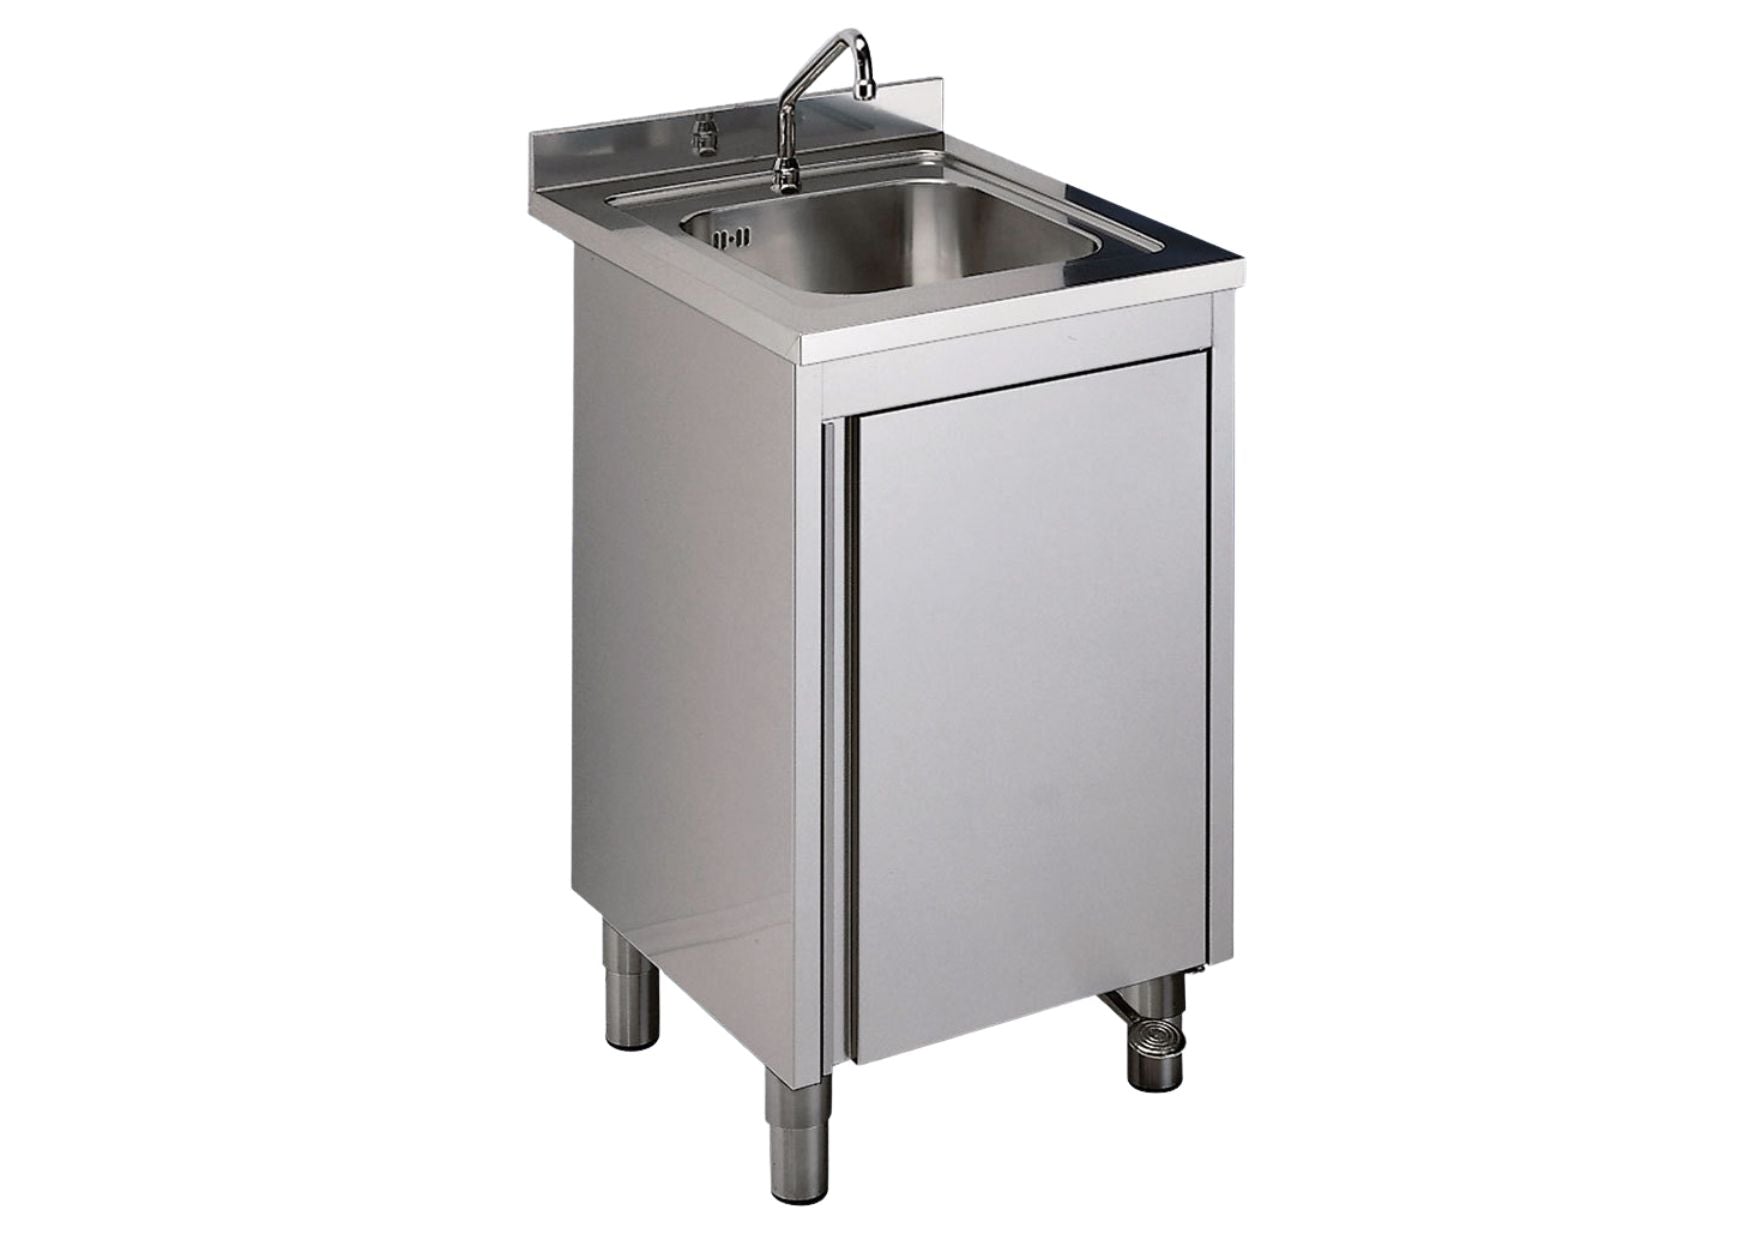 Stainless steel hand basin with foot pedal